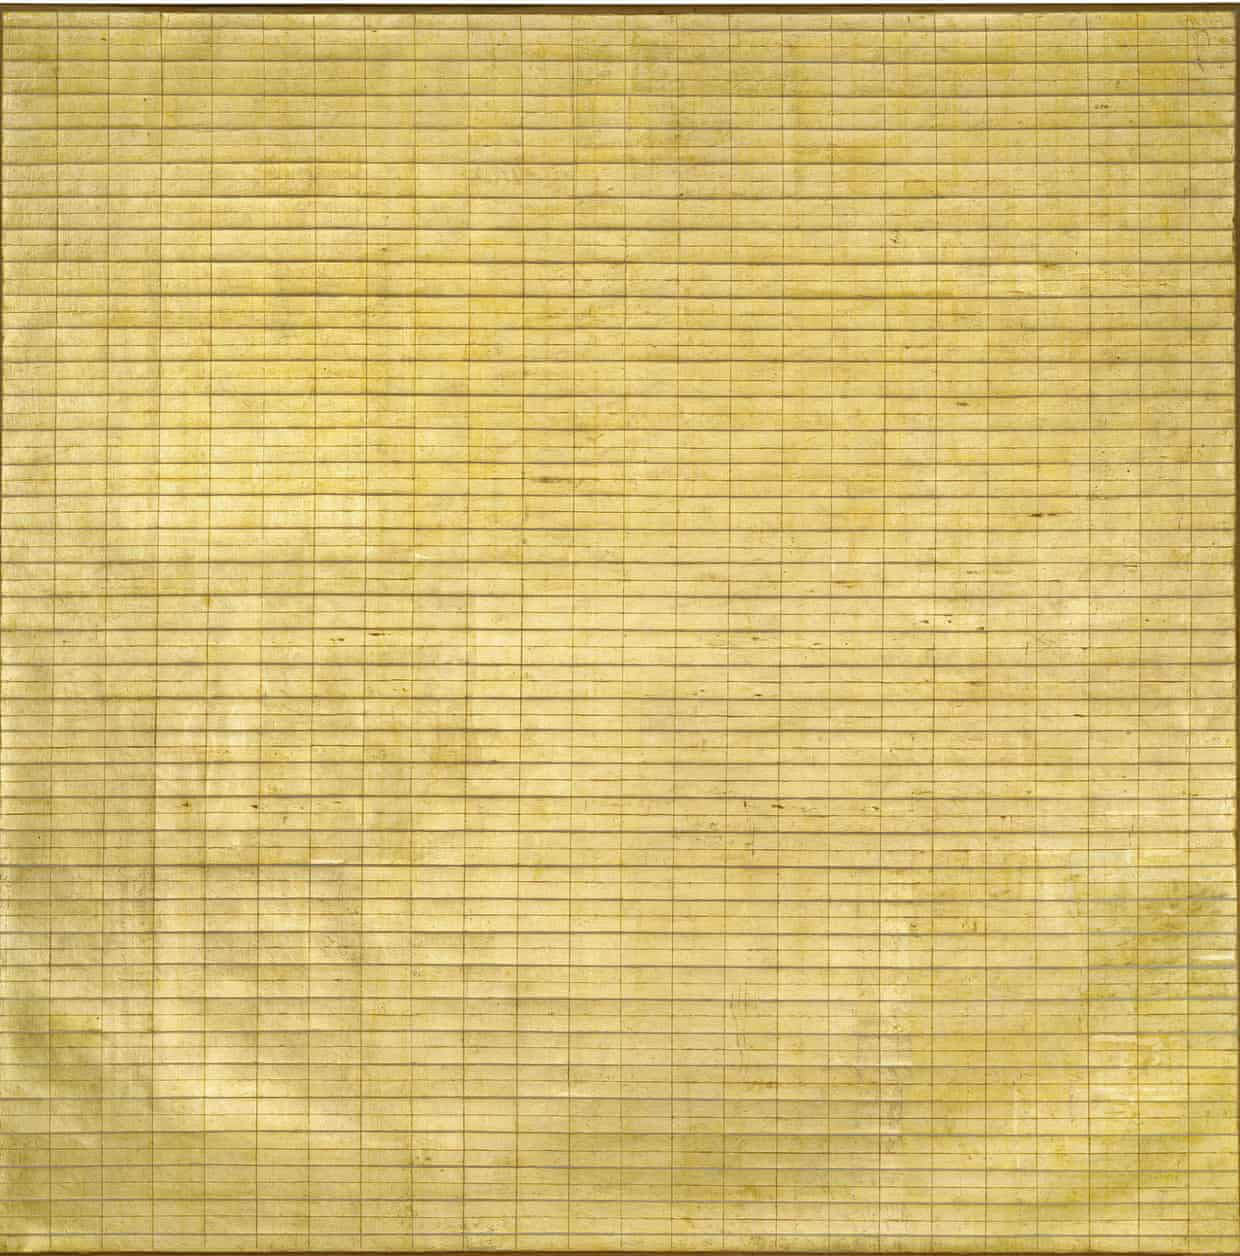 Friendship, 1963 by Agnes Martin as featured in Paintings, Writings, Remembrances